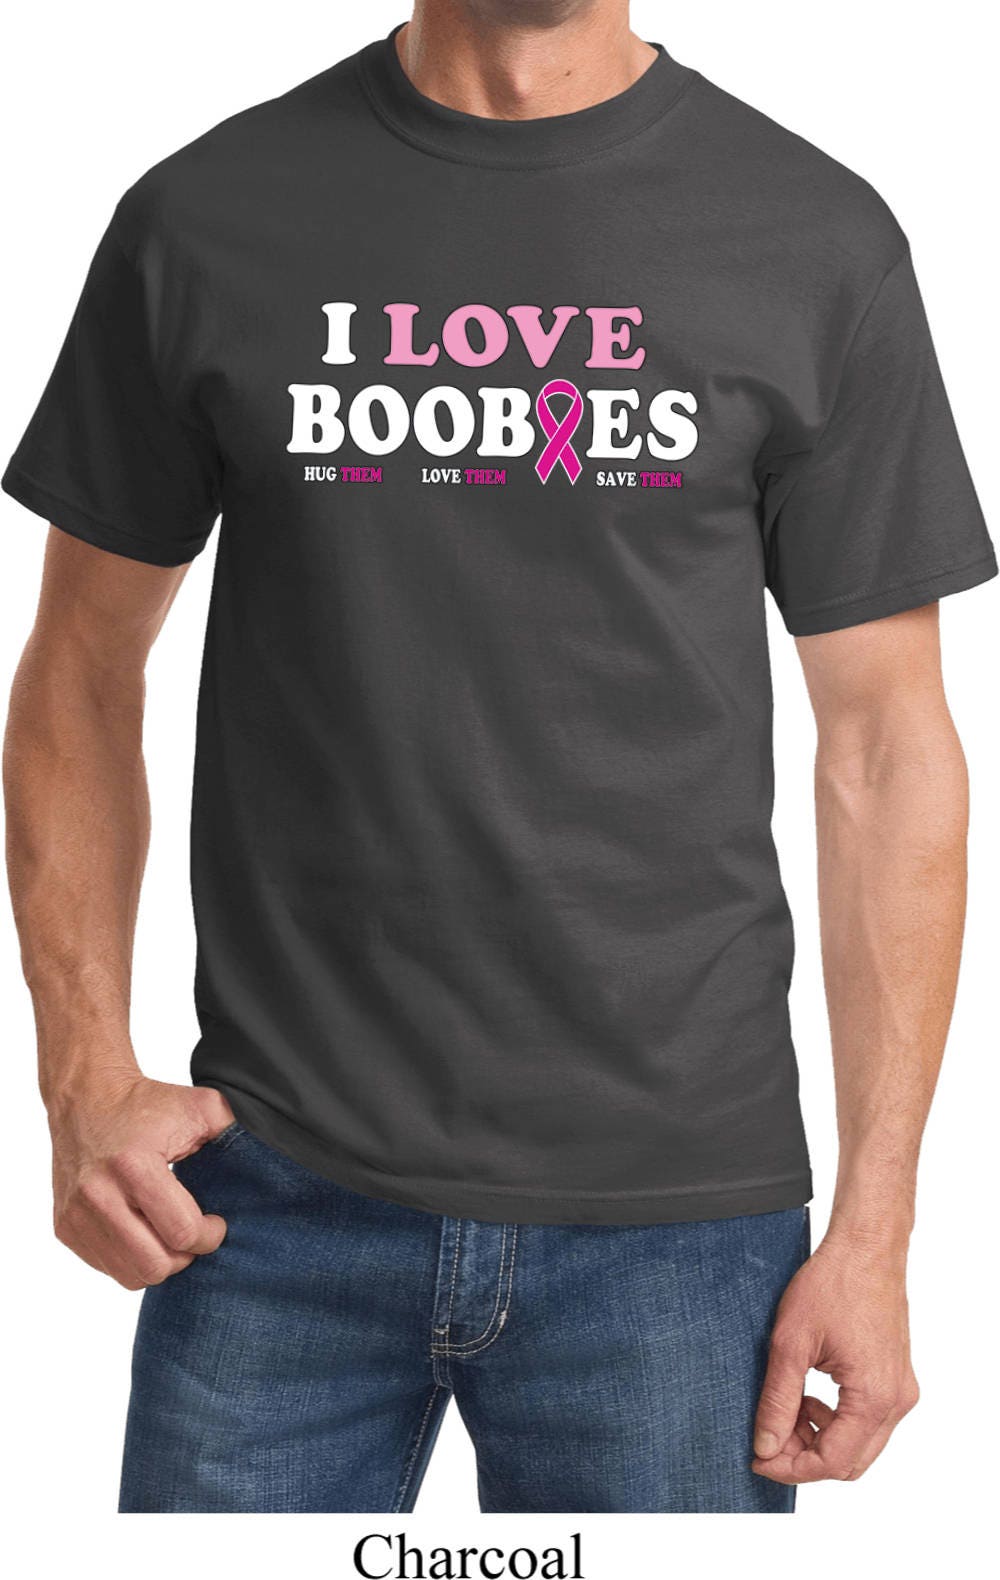 A shirt like this that has pockets that your boobs go in : r